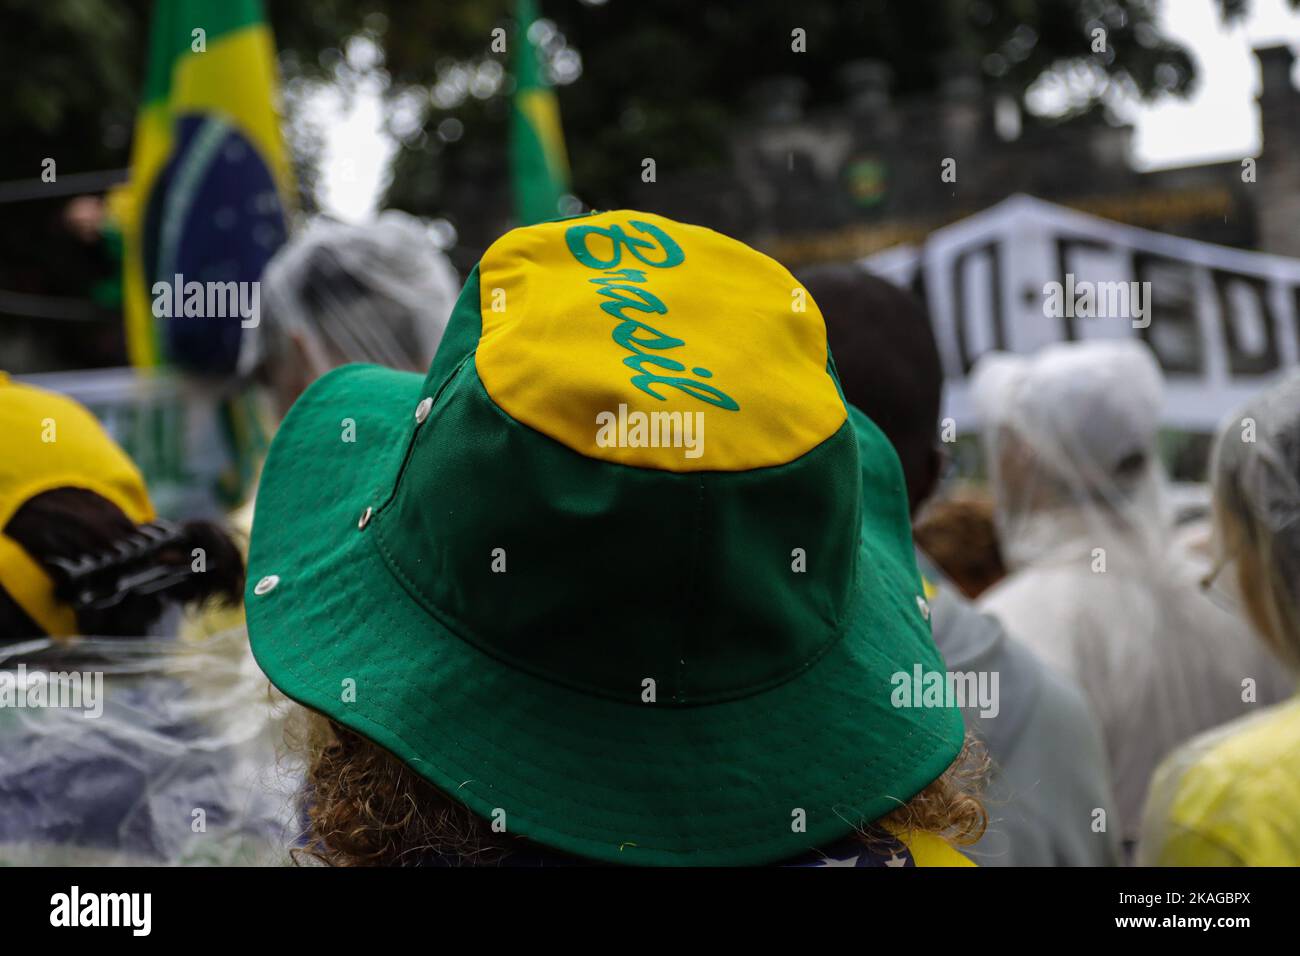 Belo Horizonte, Minas Gerais, Brazil. 2nd Nov, 2022. Supporters of President Jair Bolsonaro of the Liberal Party (PL) protest in front of the Brazilian Army barracks in Belo Horizonte, Minas Gerais, Brazil, calling for military intervention over the outcome of the presidential election, where Luiz InÃ¡cio Lula da Silva, from the Workers' Party (PT) was elected on October 30th. (Credit Image: © Rodney Costa/ZUMA Press Wire) Credit: ZUMA Press, Inc./Alamy Live News Stock Photo